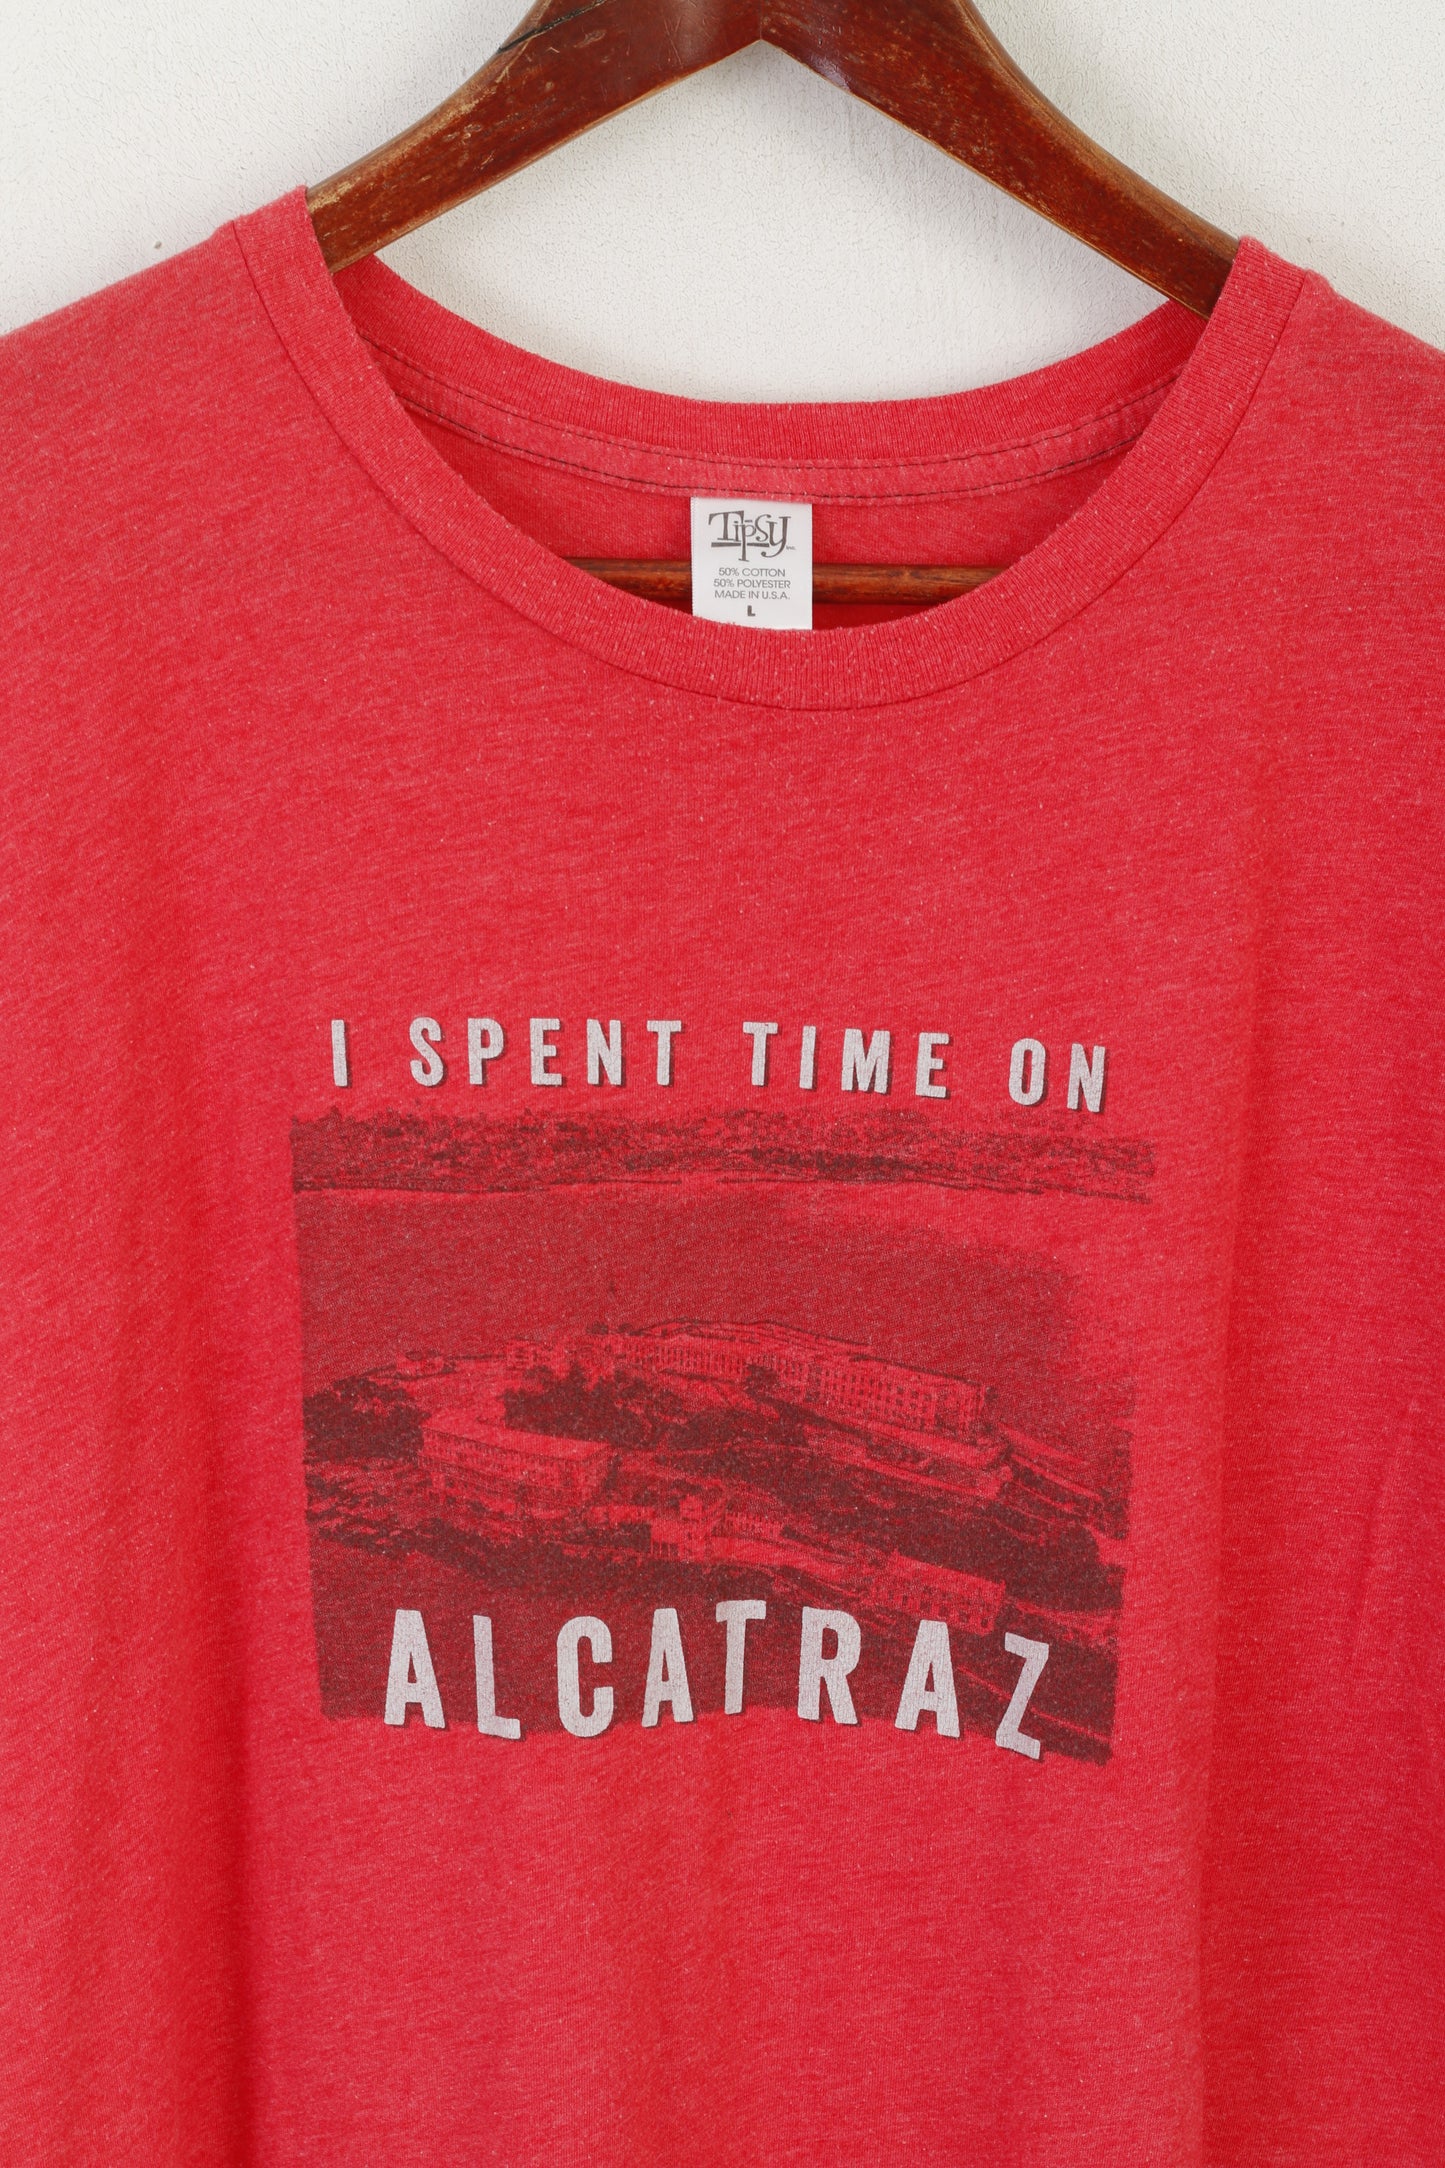 Tipsy Men L T-Shirt Red Cotton Graphic I Spent Time On Alcatraz Top